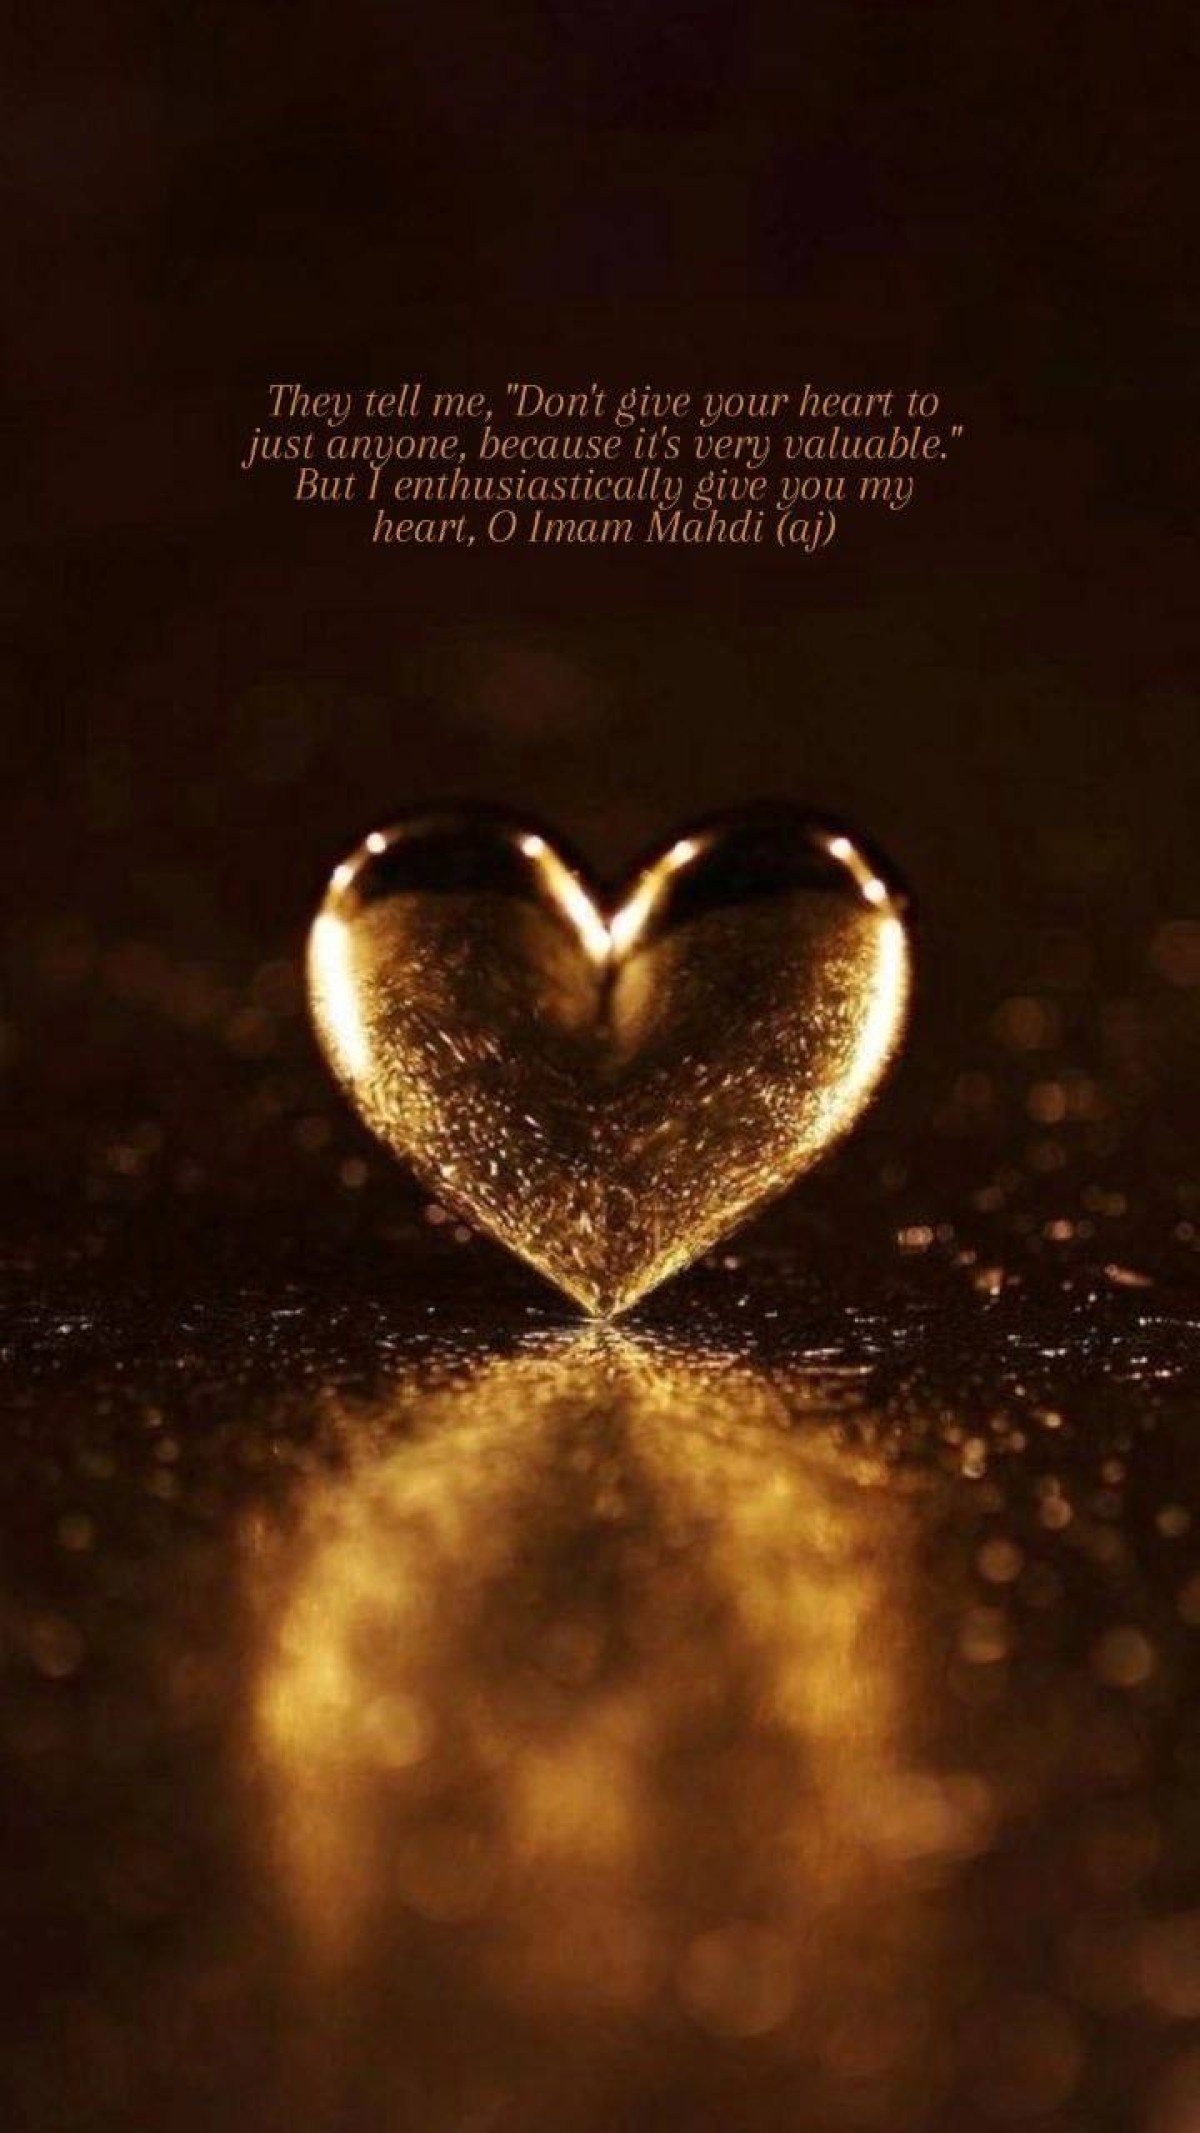 They tell me, "Don't give your heart to just anyone, because it's very valuable." But I enthusiastically give you my heart,O Imam Mahdi (aj)